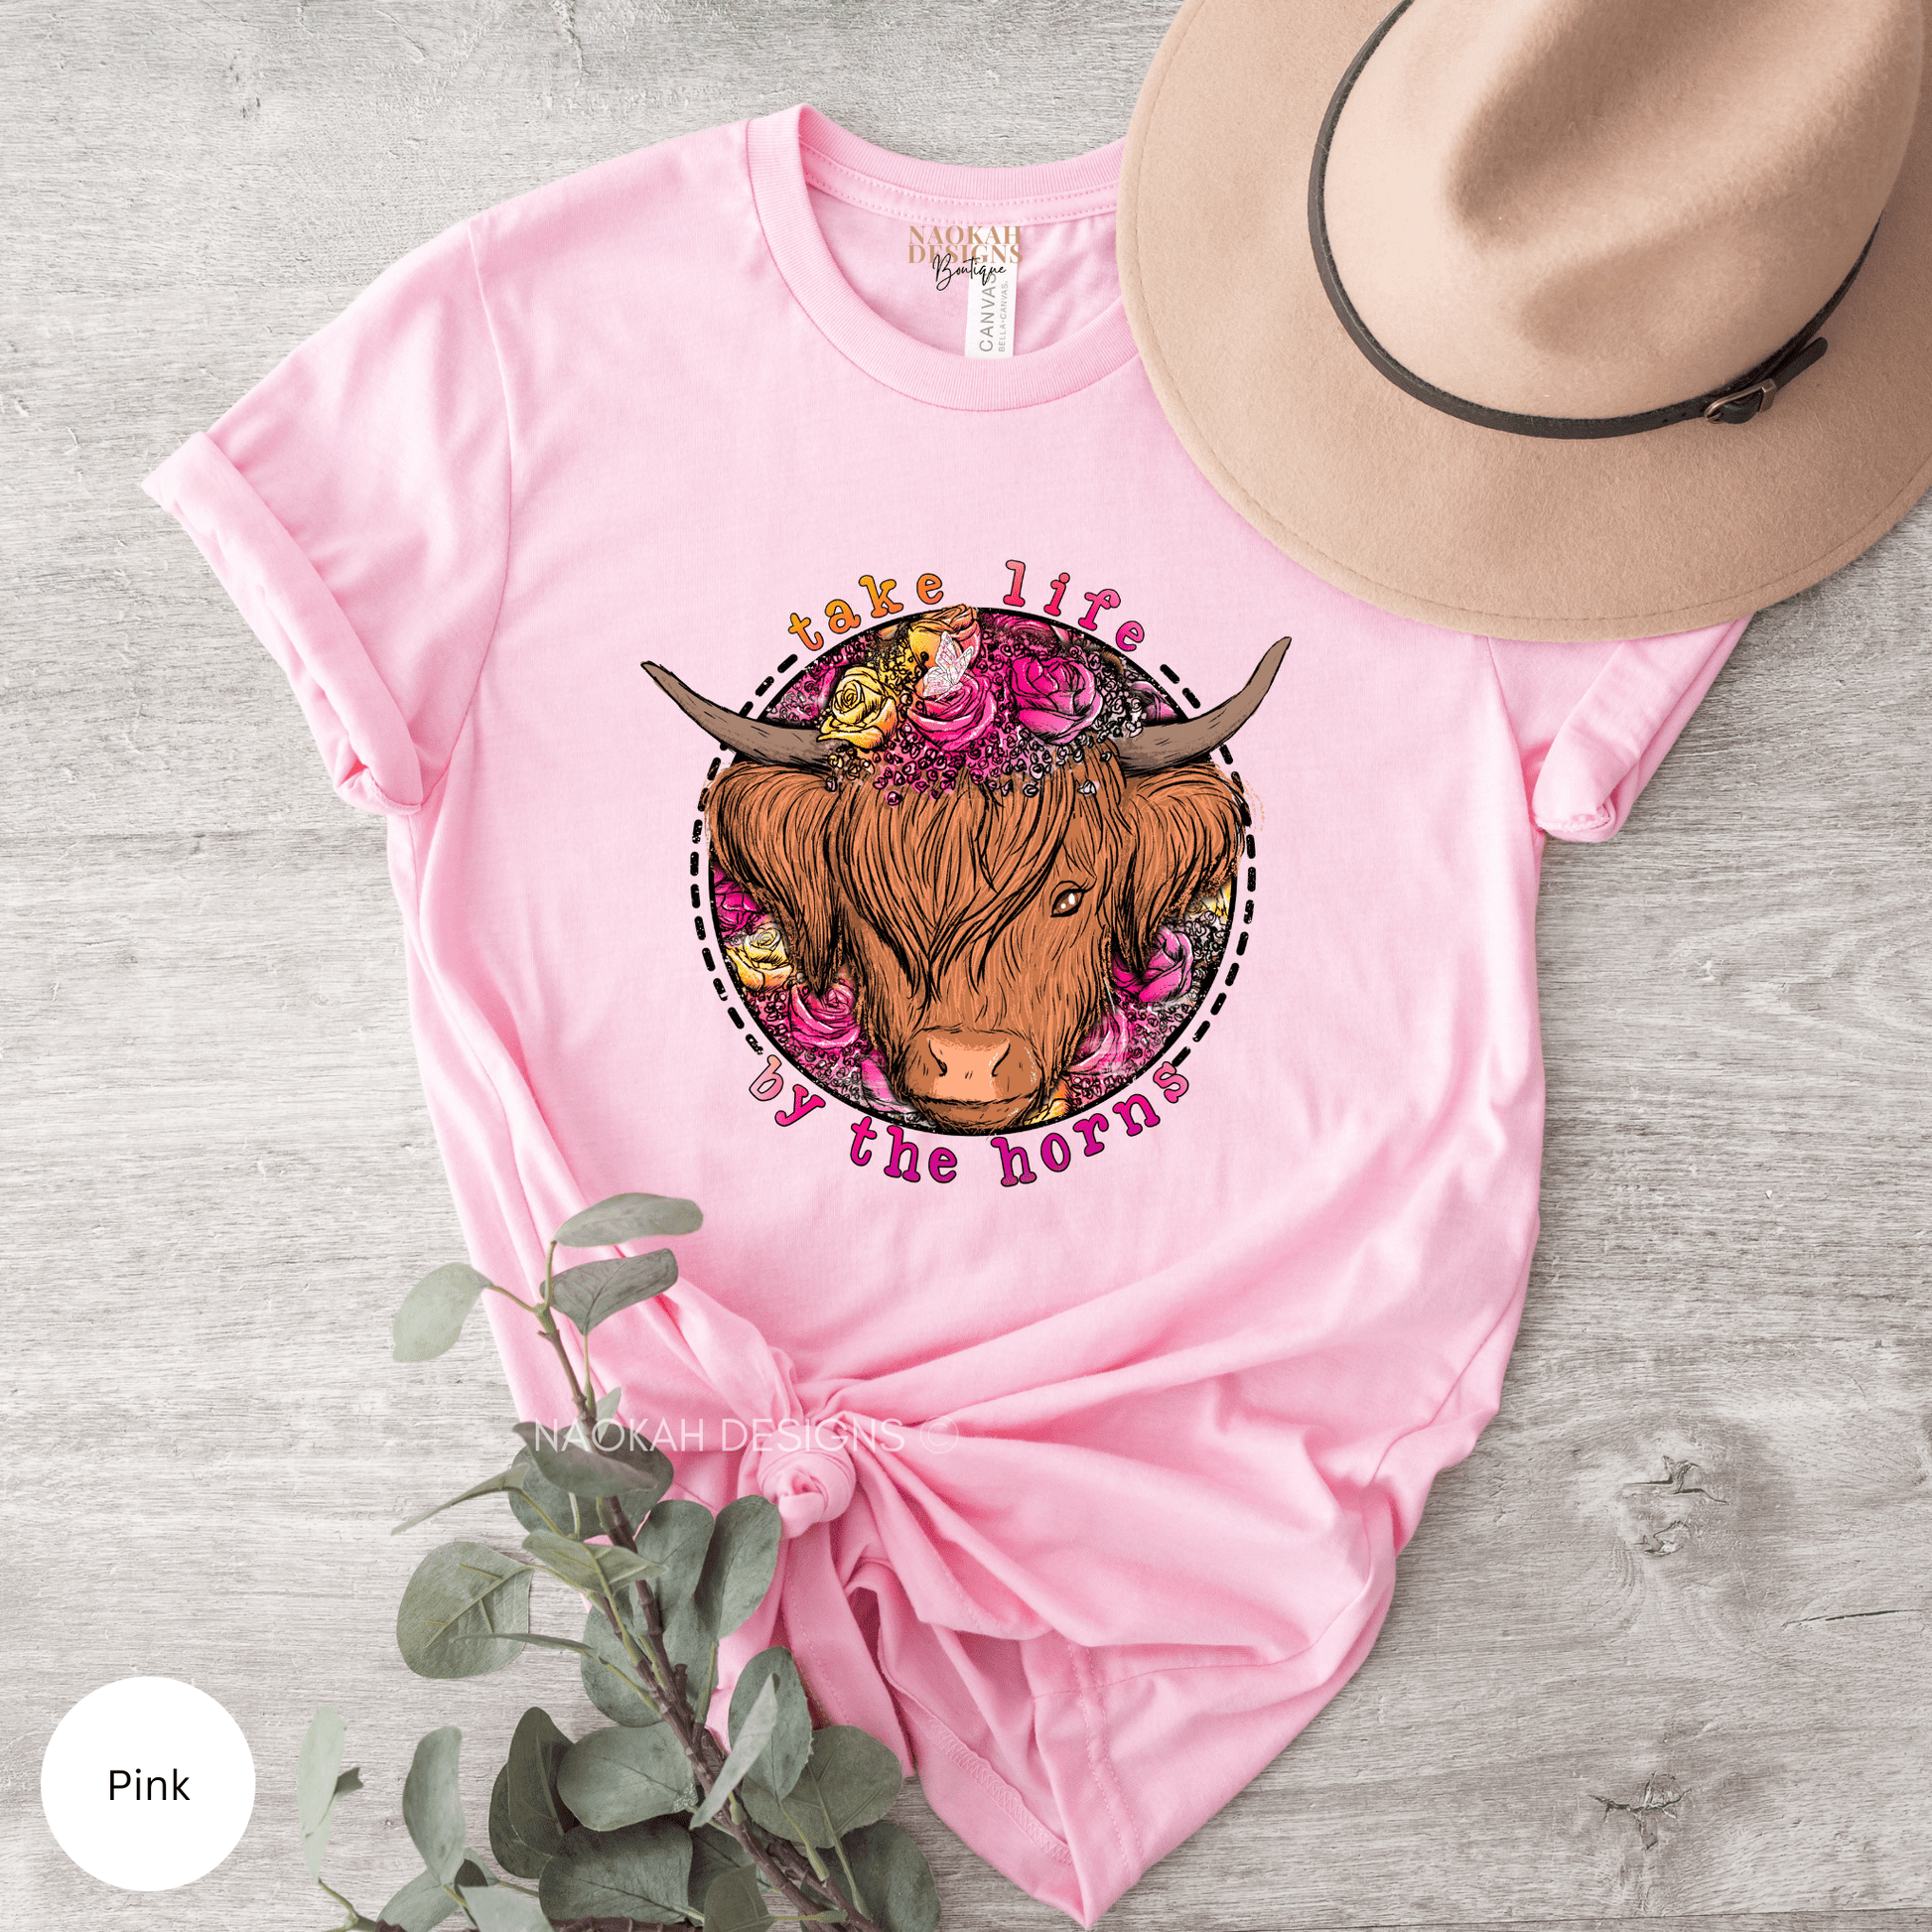 Take Life By The Horns shirt, cow flowers shirt, cowboy shirt, cowgirl shirt, rodeo shirt, bull horns shirt, western shirt, grab life by the horns shirt